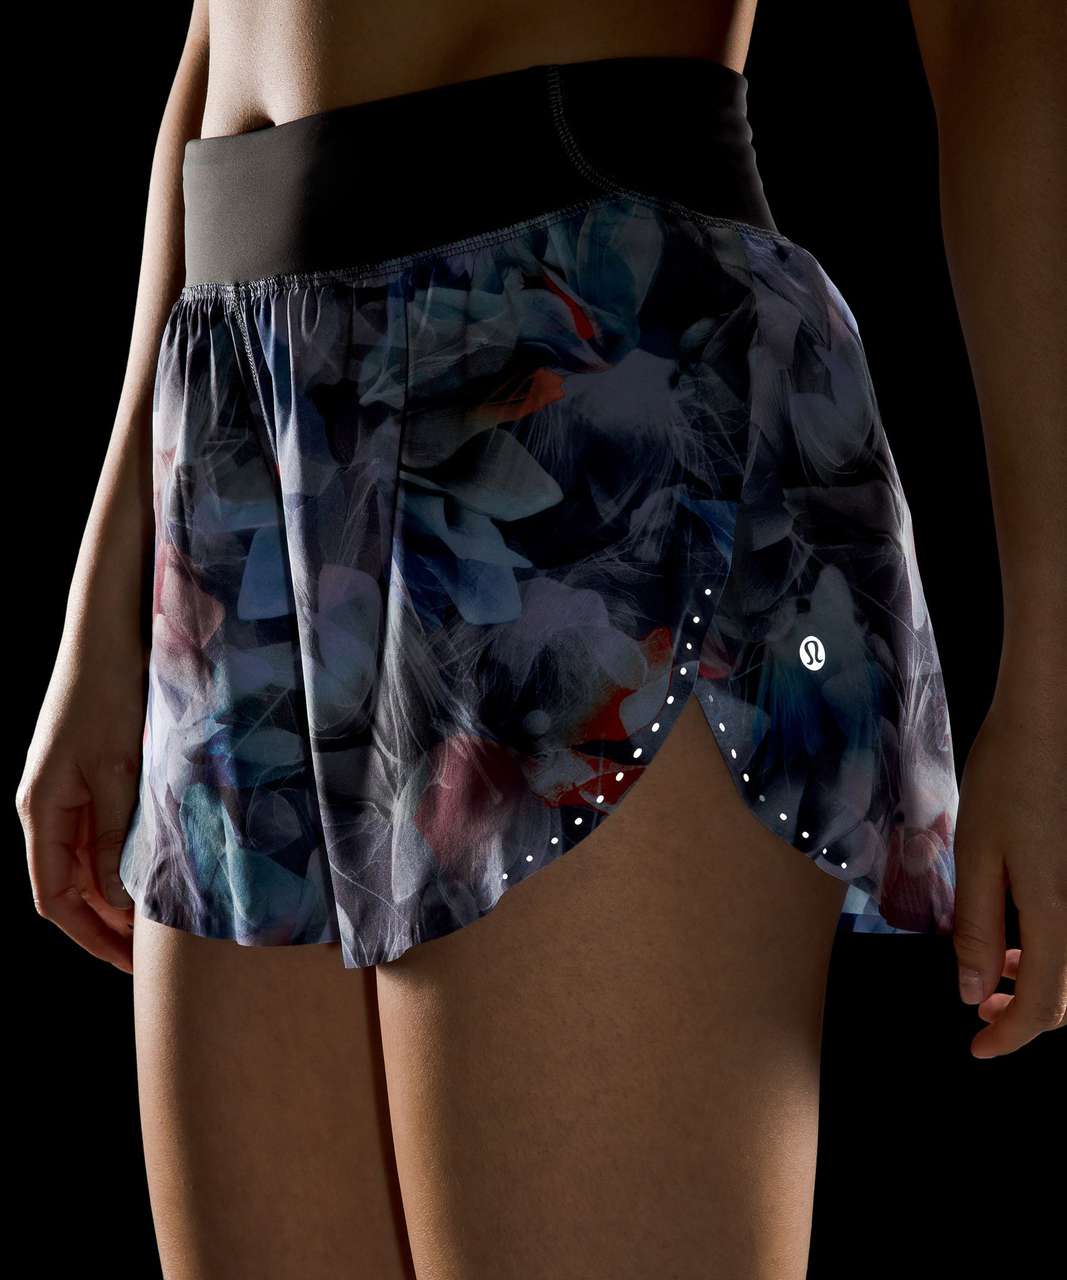 Lululemon Fast and Free Reflective High-Rise Classic-Fit Short 3" - Luminescent Floral Multi / Graphite Grey